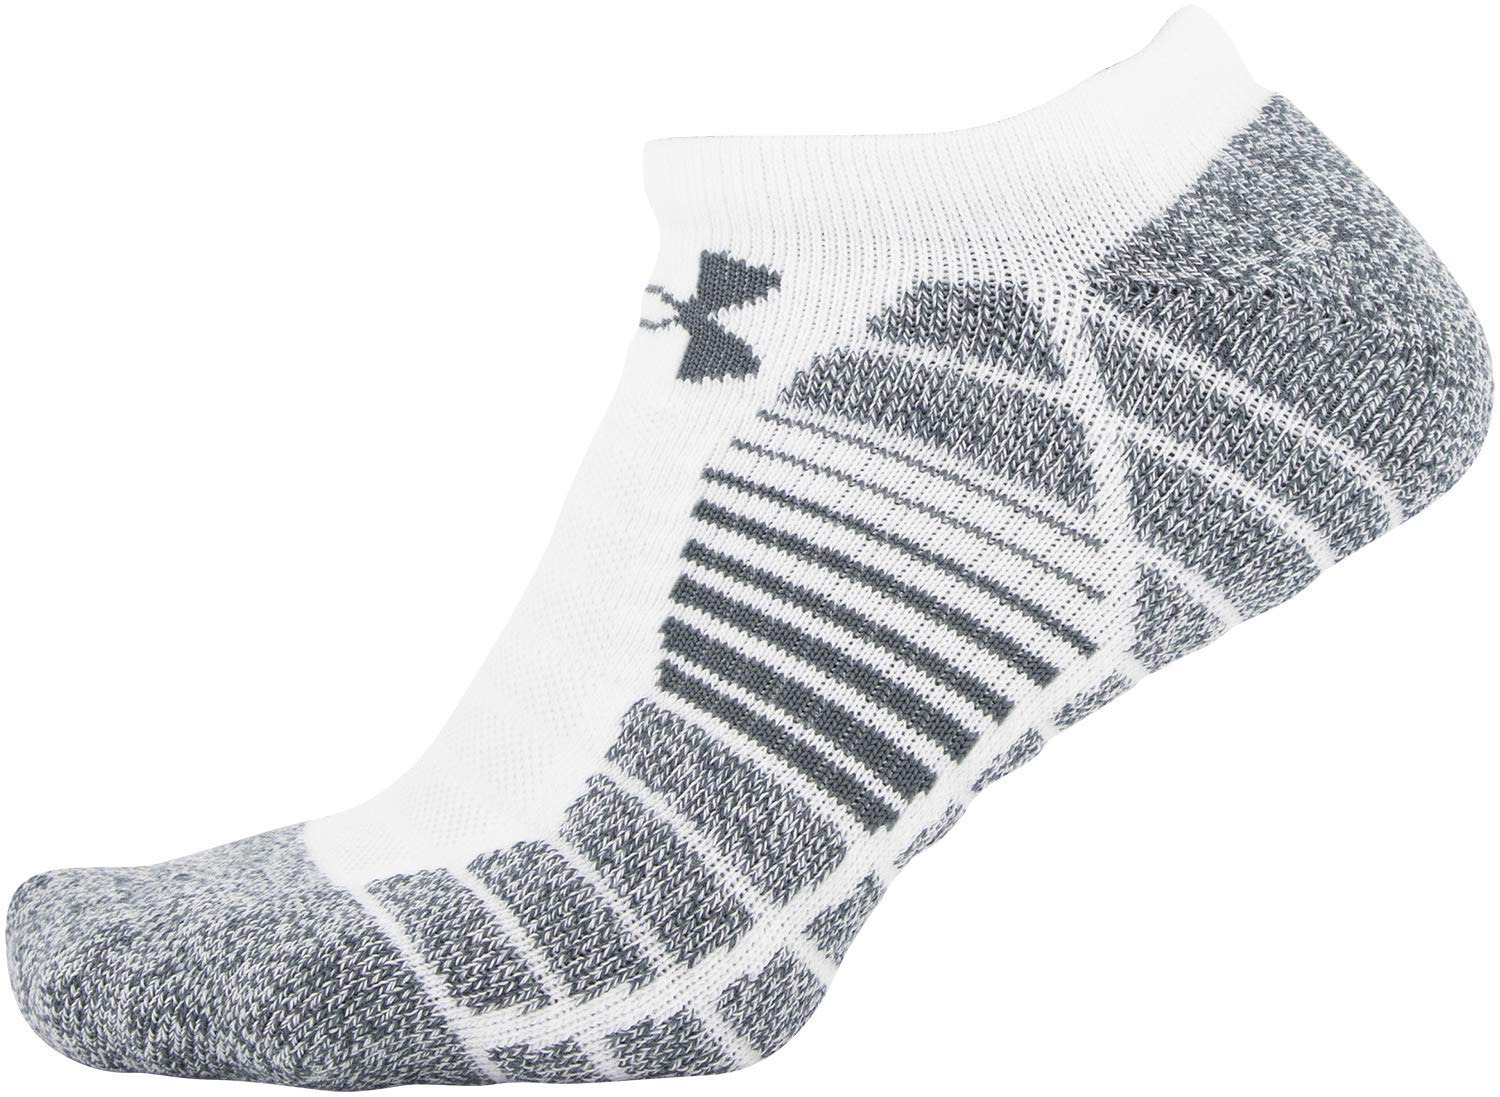 Under Armour unisex-adult Elevated Performance No Show Socks, 3-pairs